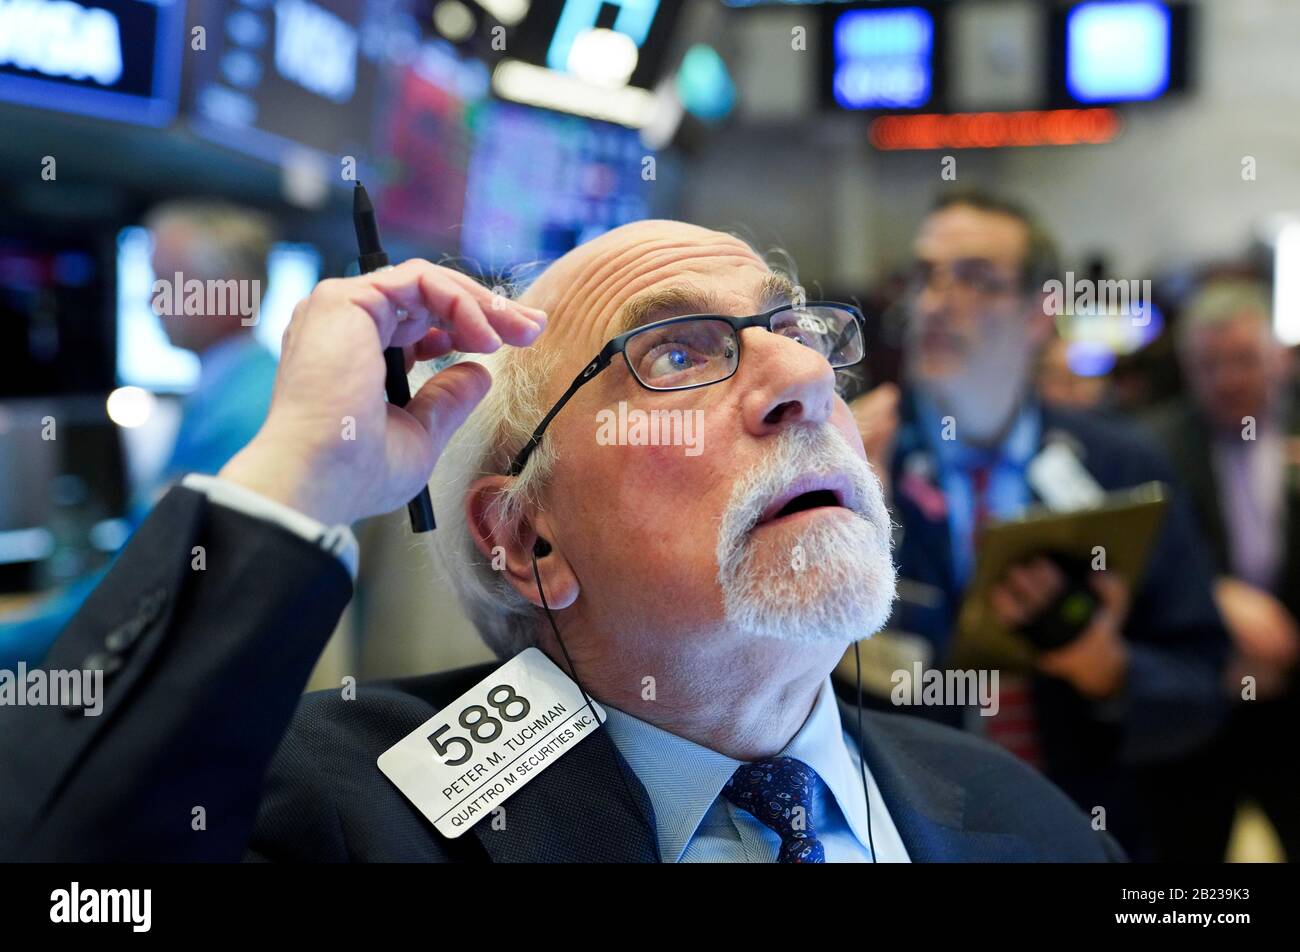 Beijing, USA. 27th Feb, 2020. A trader works at New York Stock Exchange in New York, the United States, Feb. 27, 2020. U.S. stocks closed sharply lower on Feb. 27 as investors fled the stocks market and flocked into safe-haven assets. Credit: Wang Ying/Xinhua/Alamy Live News Stock Photo